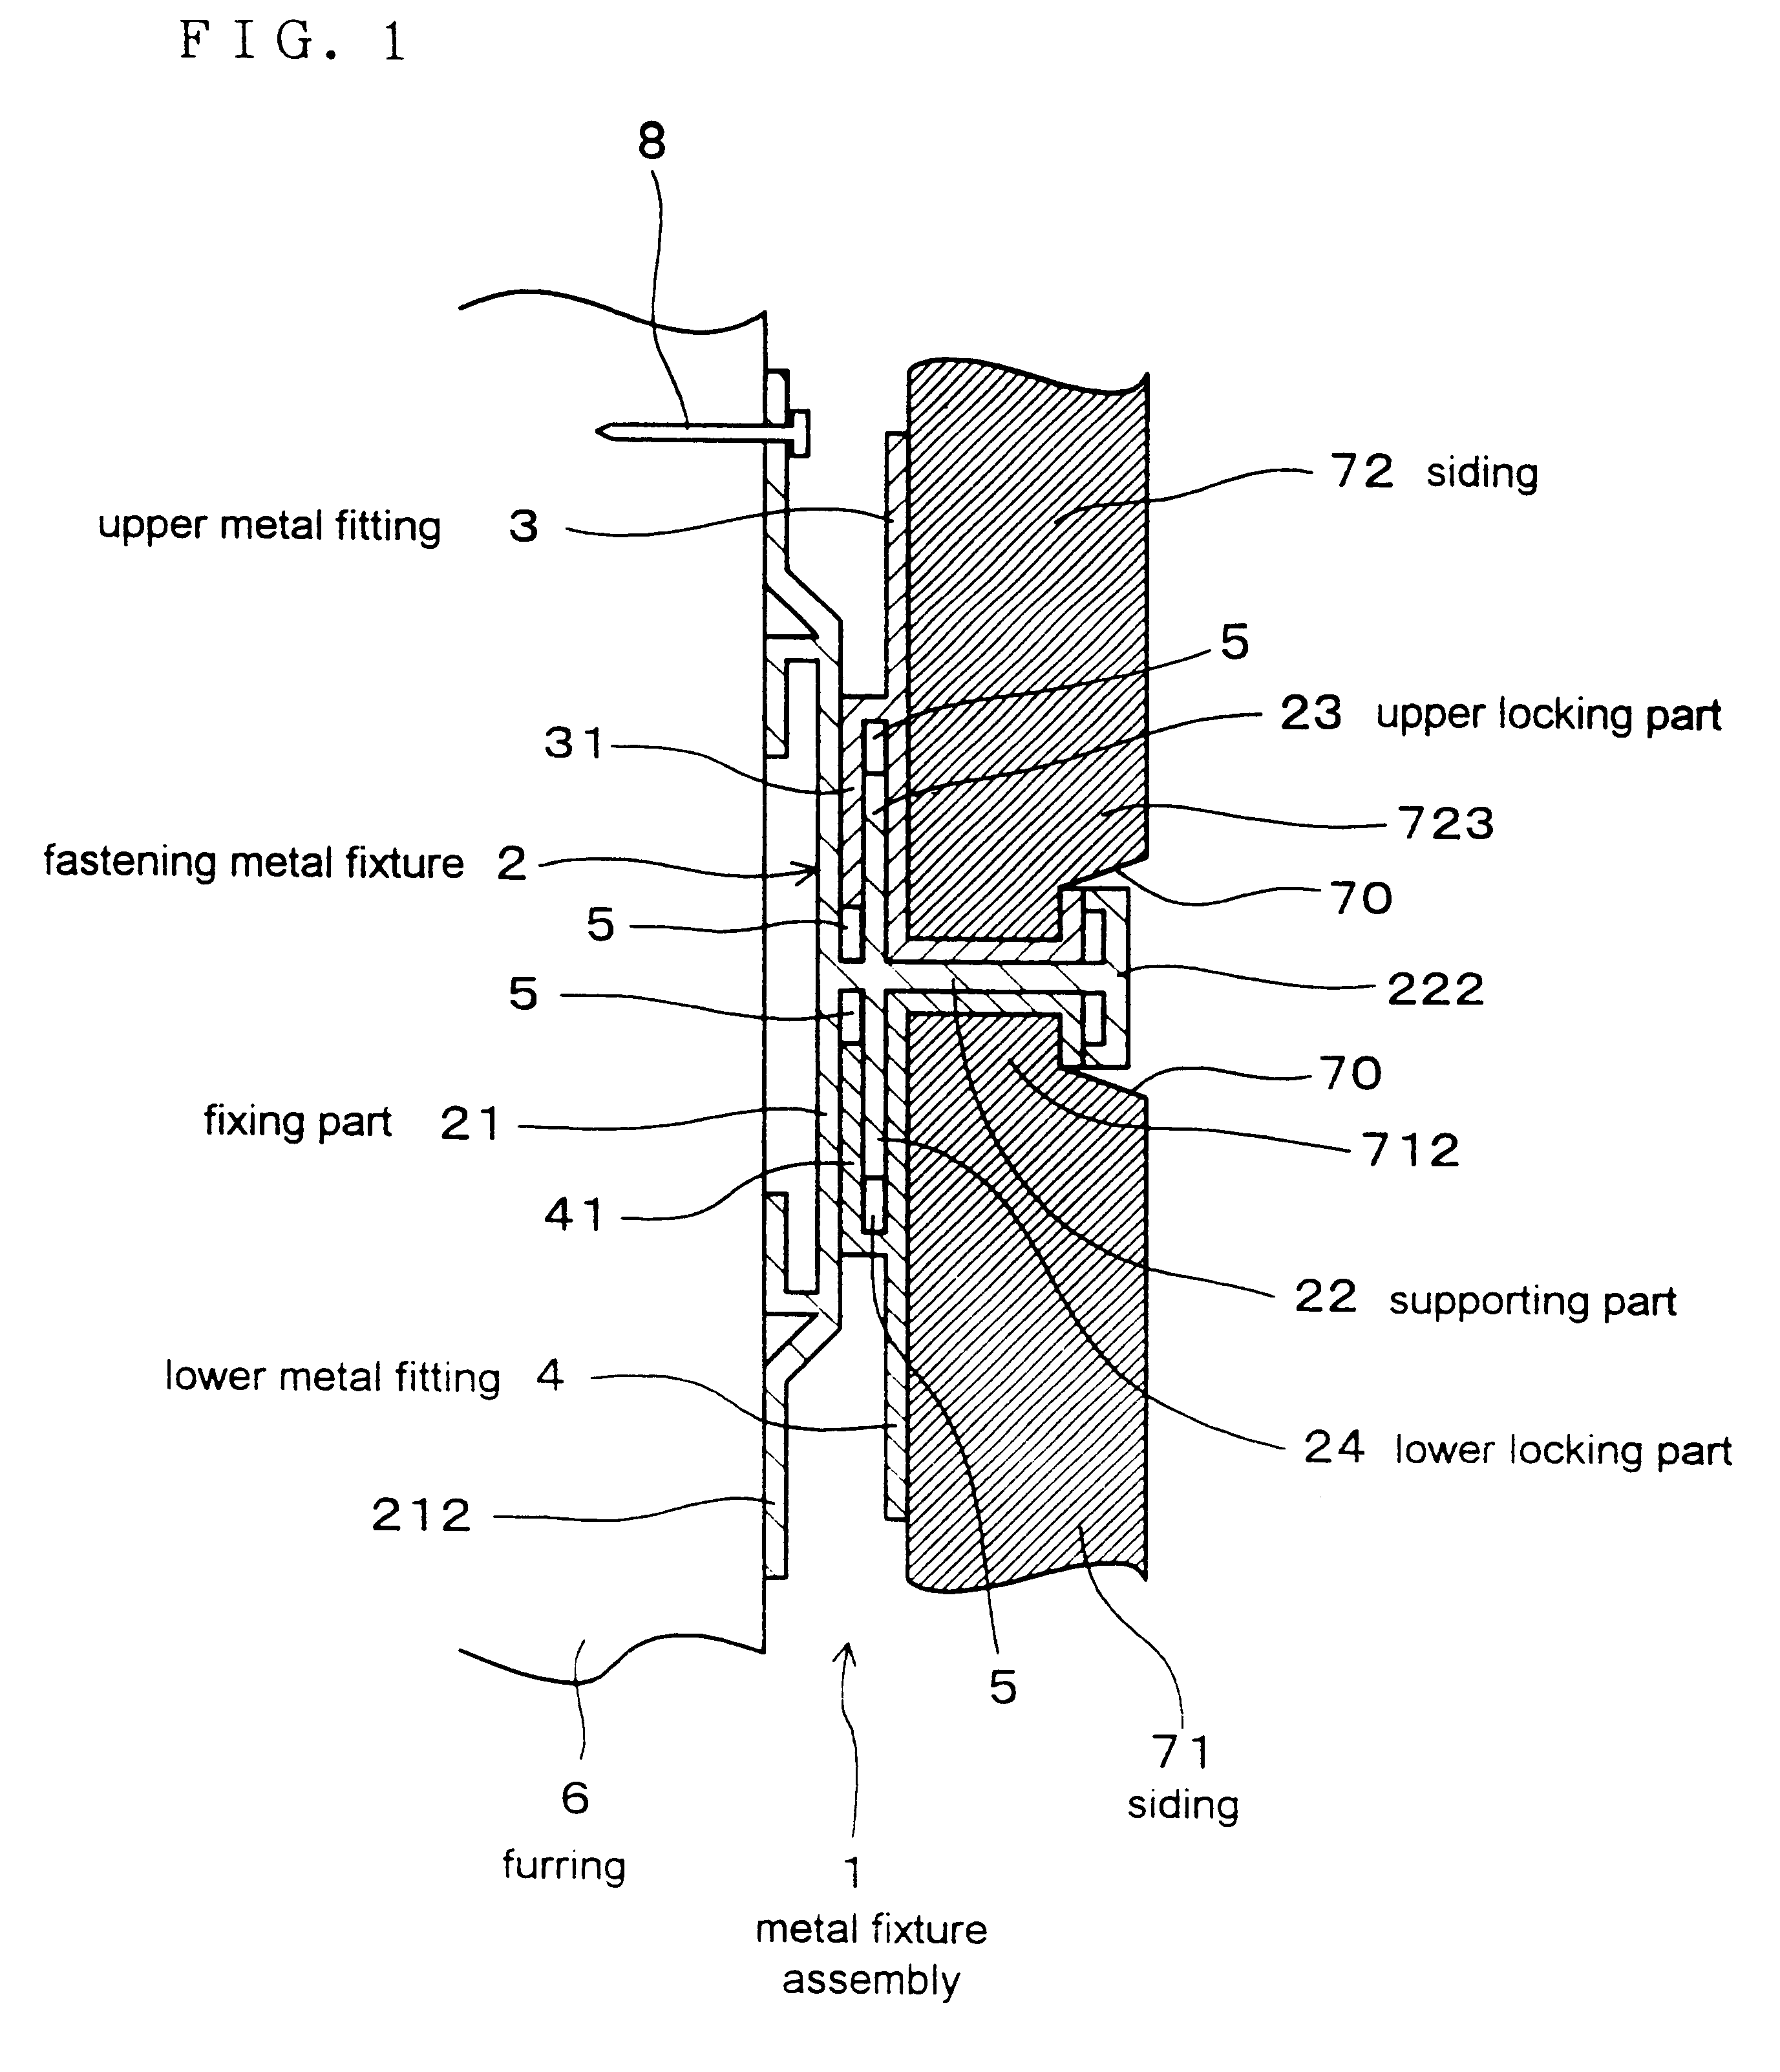 Metal fixture assembly for installation of vertical sidings, construction and method of installation